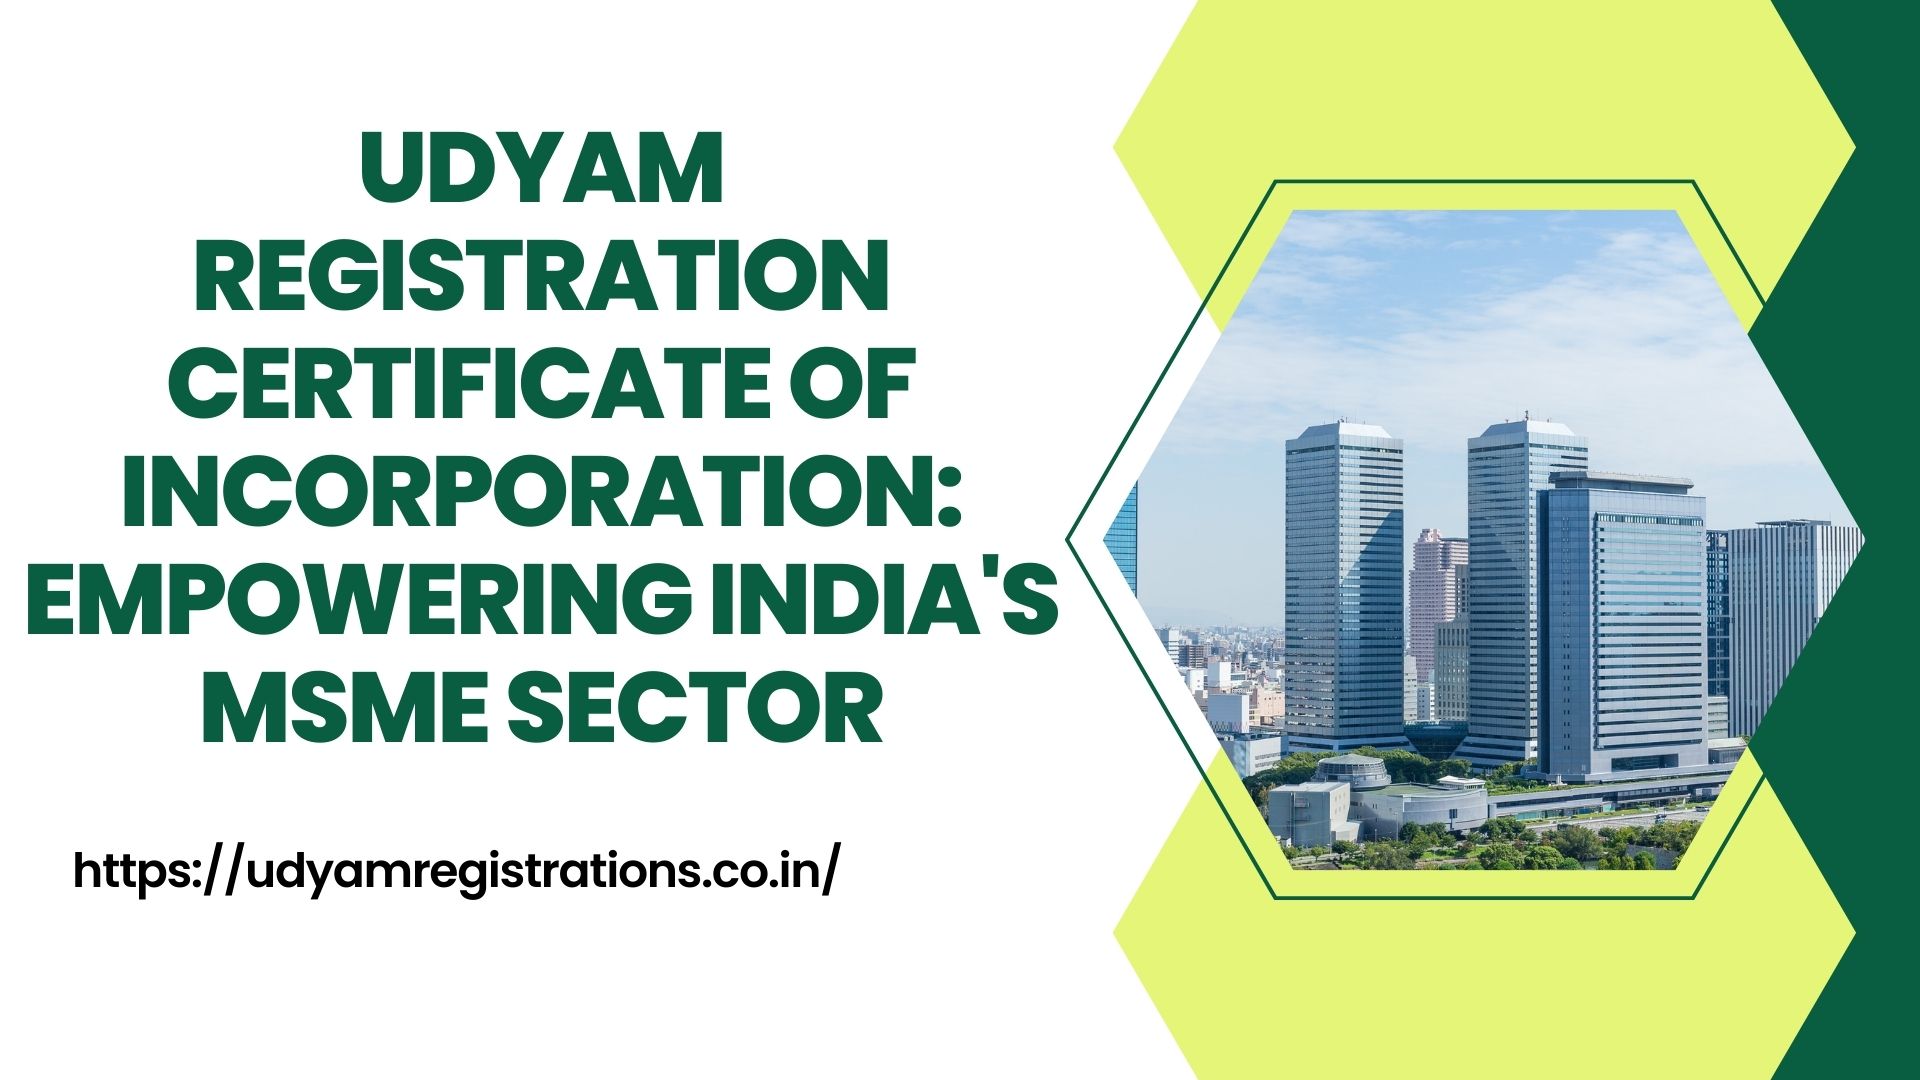 Udyam Registration Certificate of Incorporation: Empowering India's MSME Sector